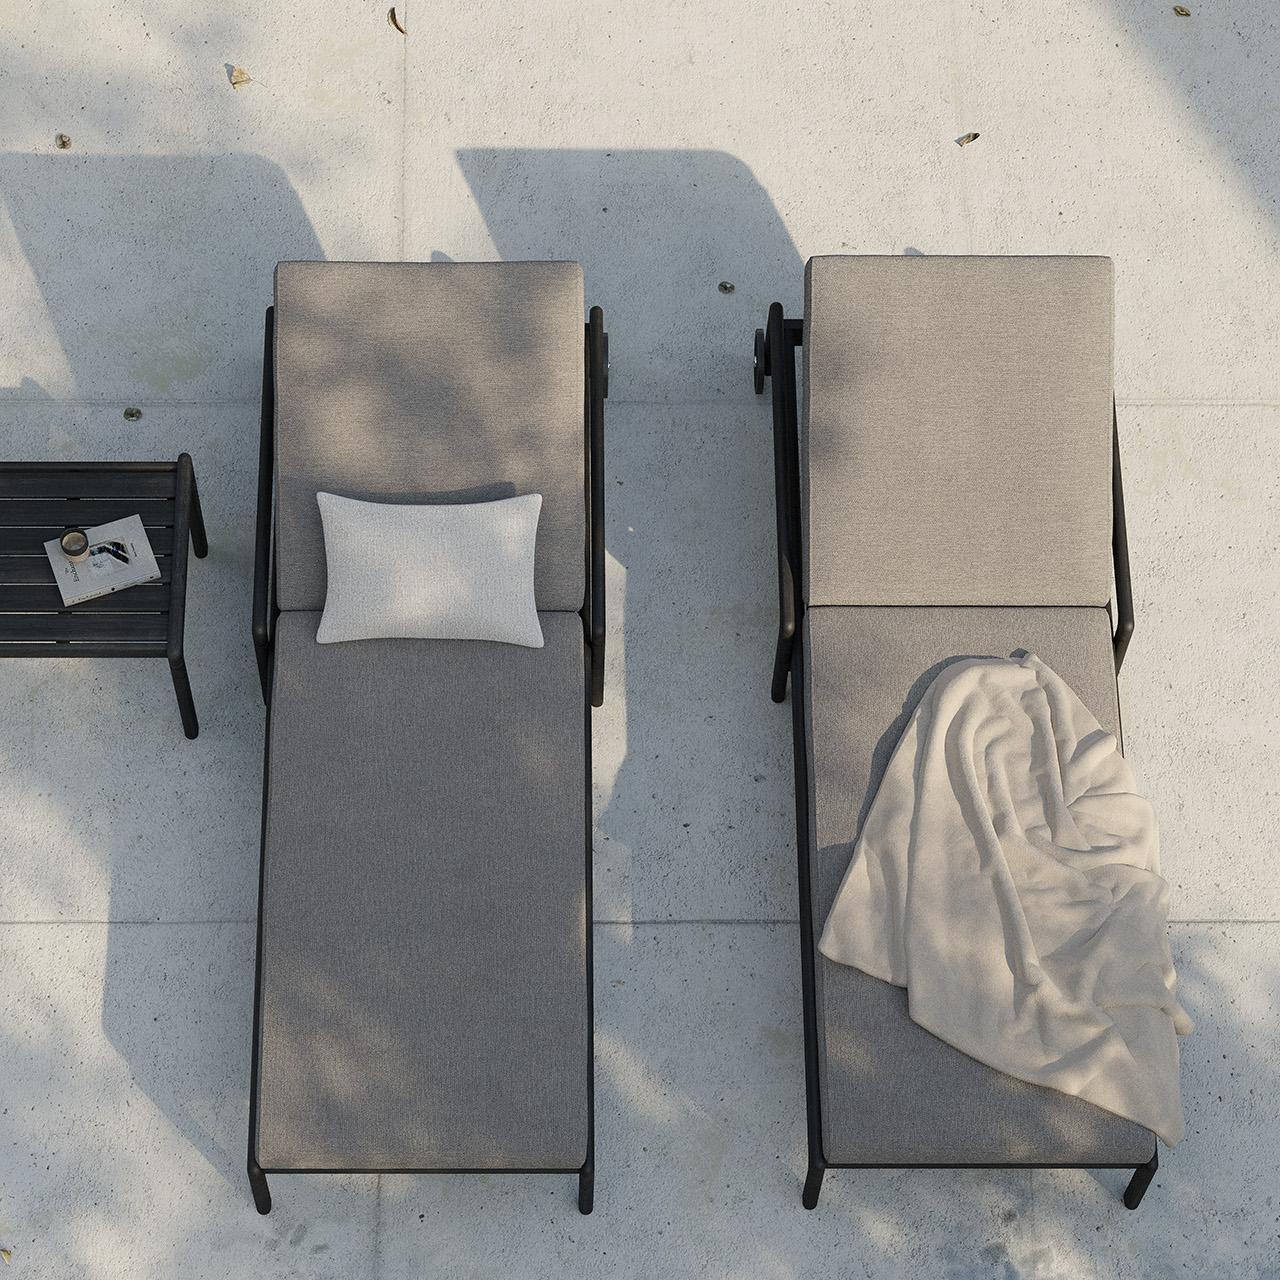 Live Light | Upgrade your outdoor atmosphere by renting furniture with Live Light